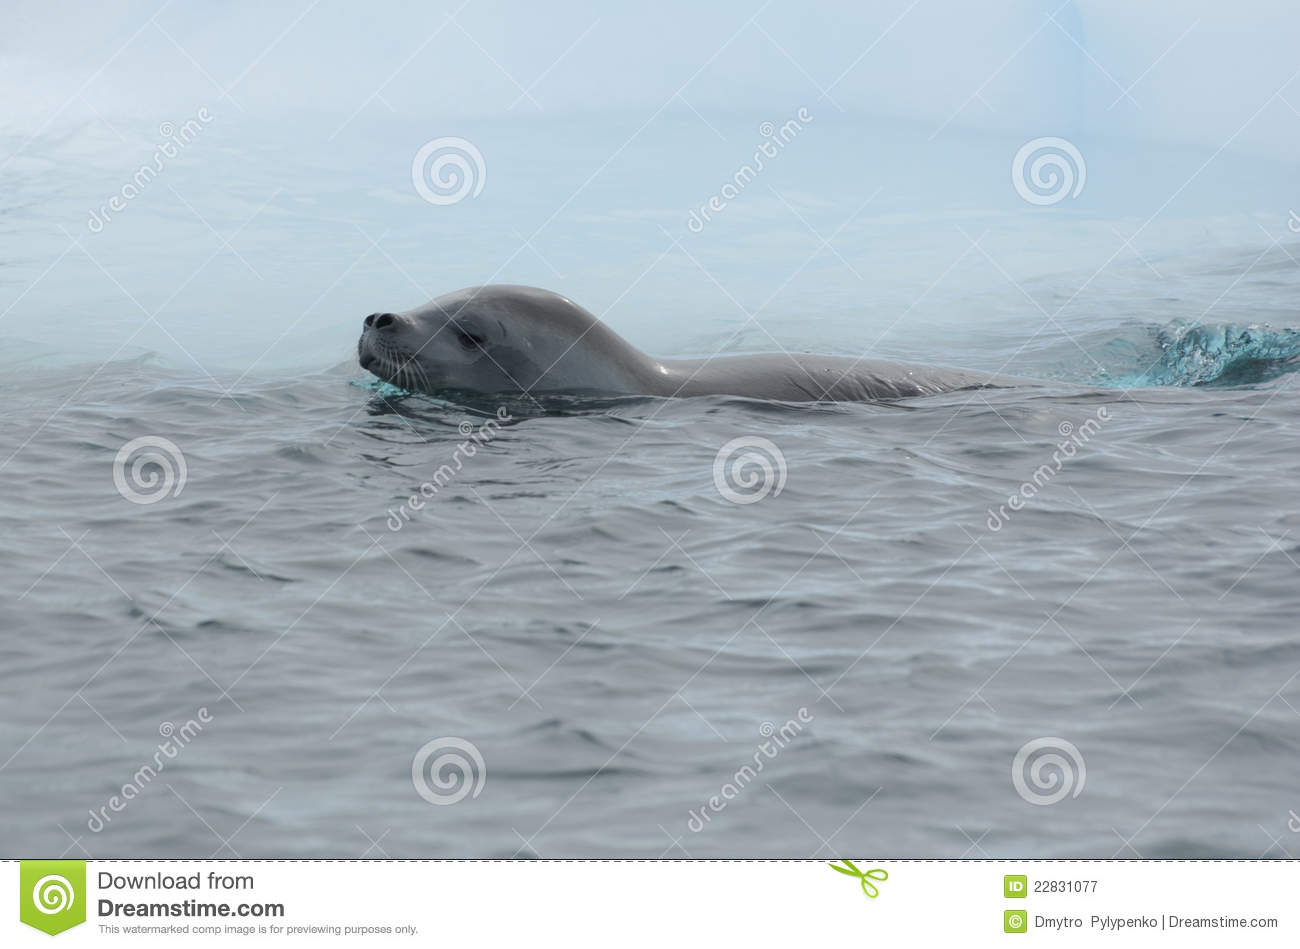 Crabeater Seal From Floating Iceberg Royalty Free Stock Photography